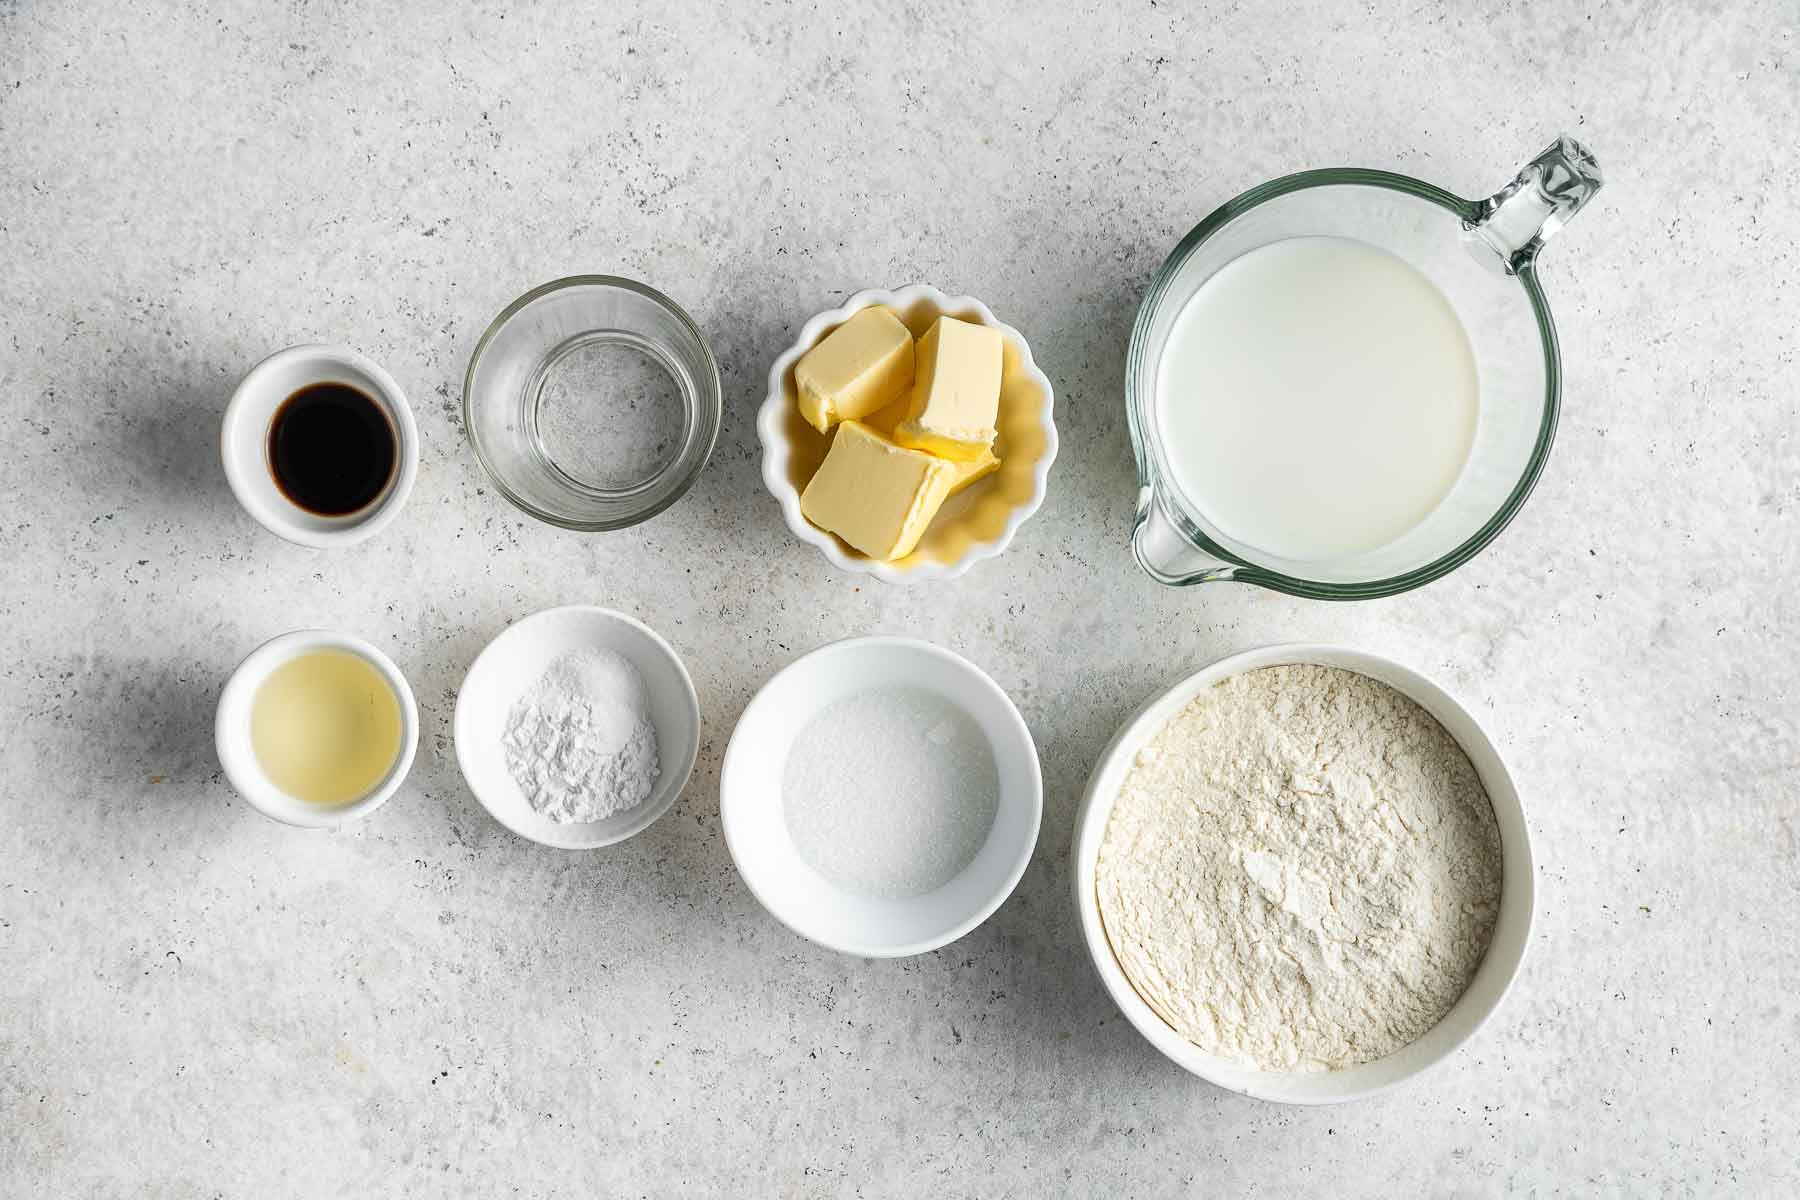 Ingredients for eggless pancakes in little bowls on white surface.